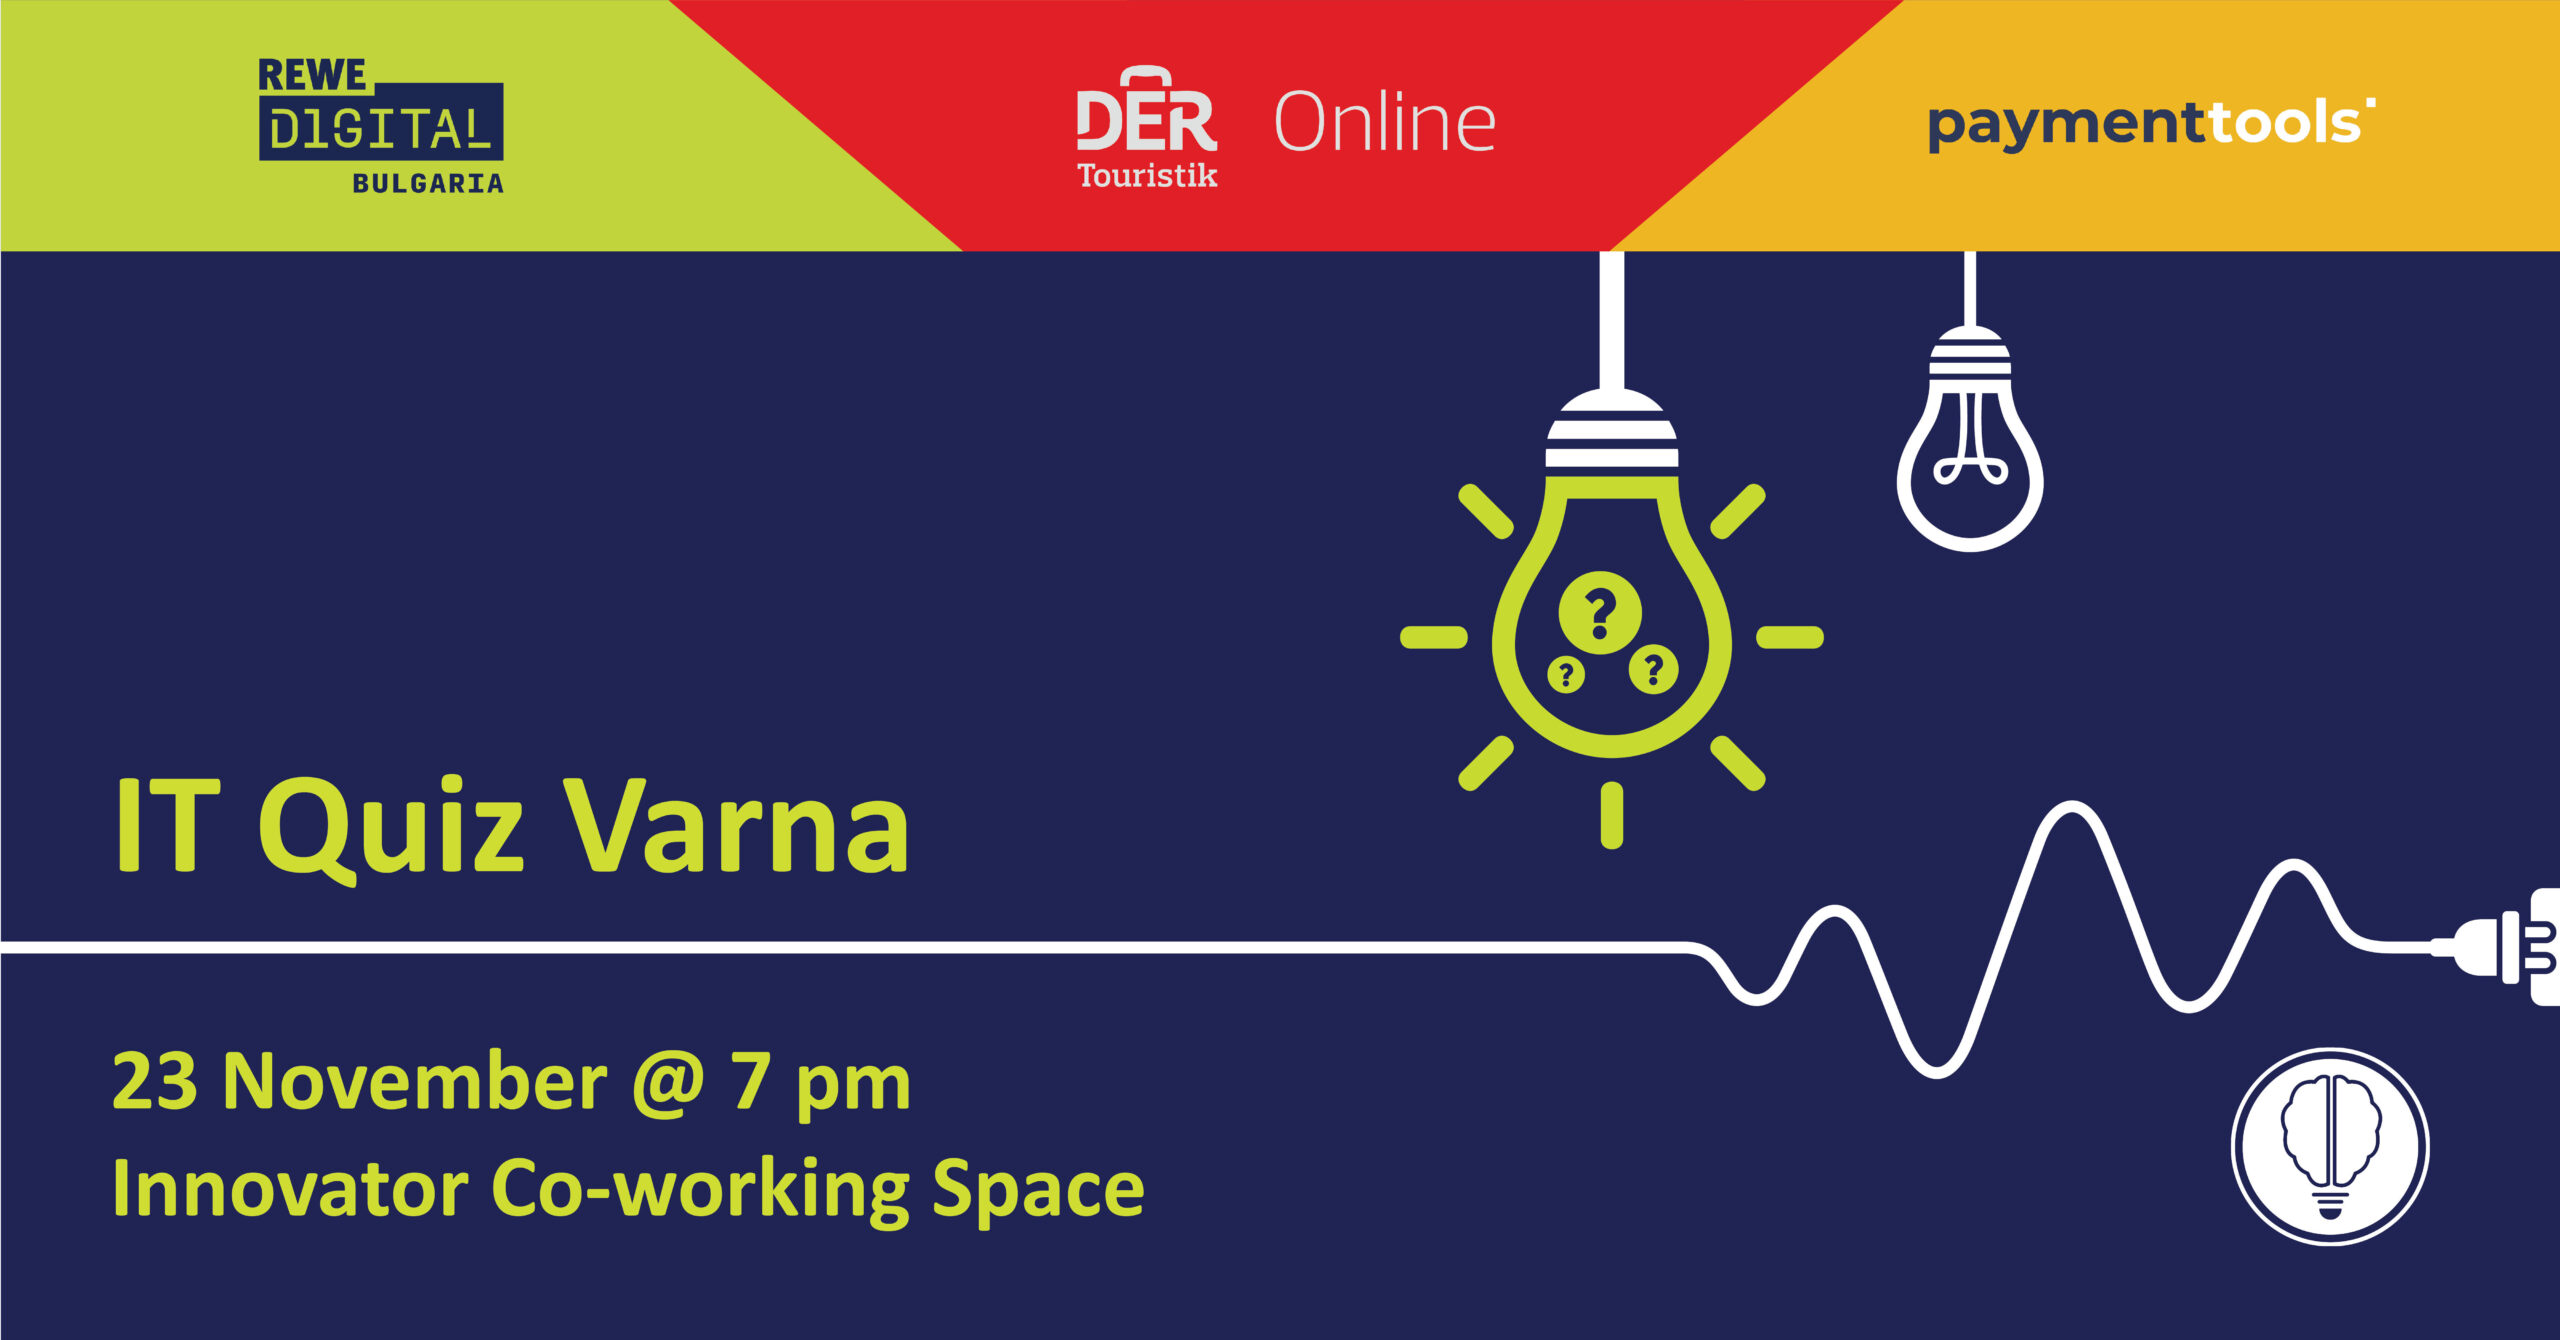 [CANCELLED] IT Quiz by REWE digital Bulgaria 1 | Innovator Coworking Space